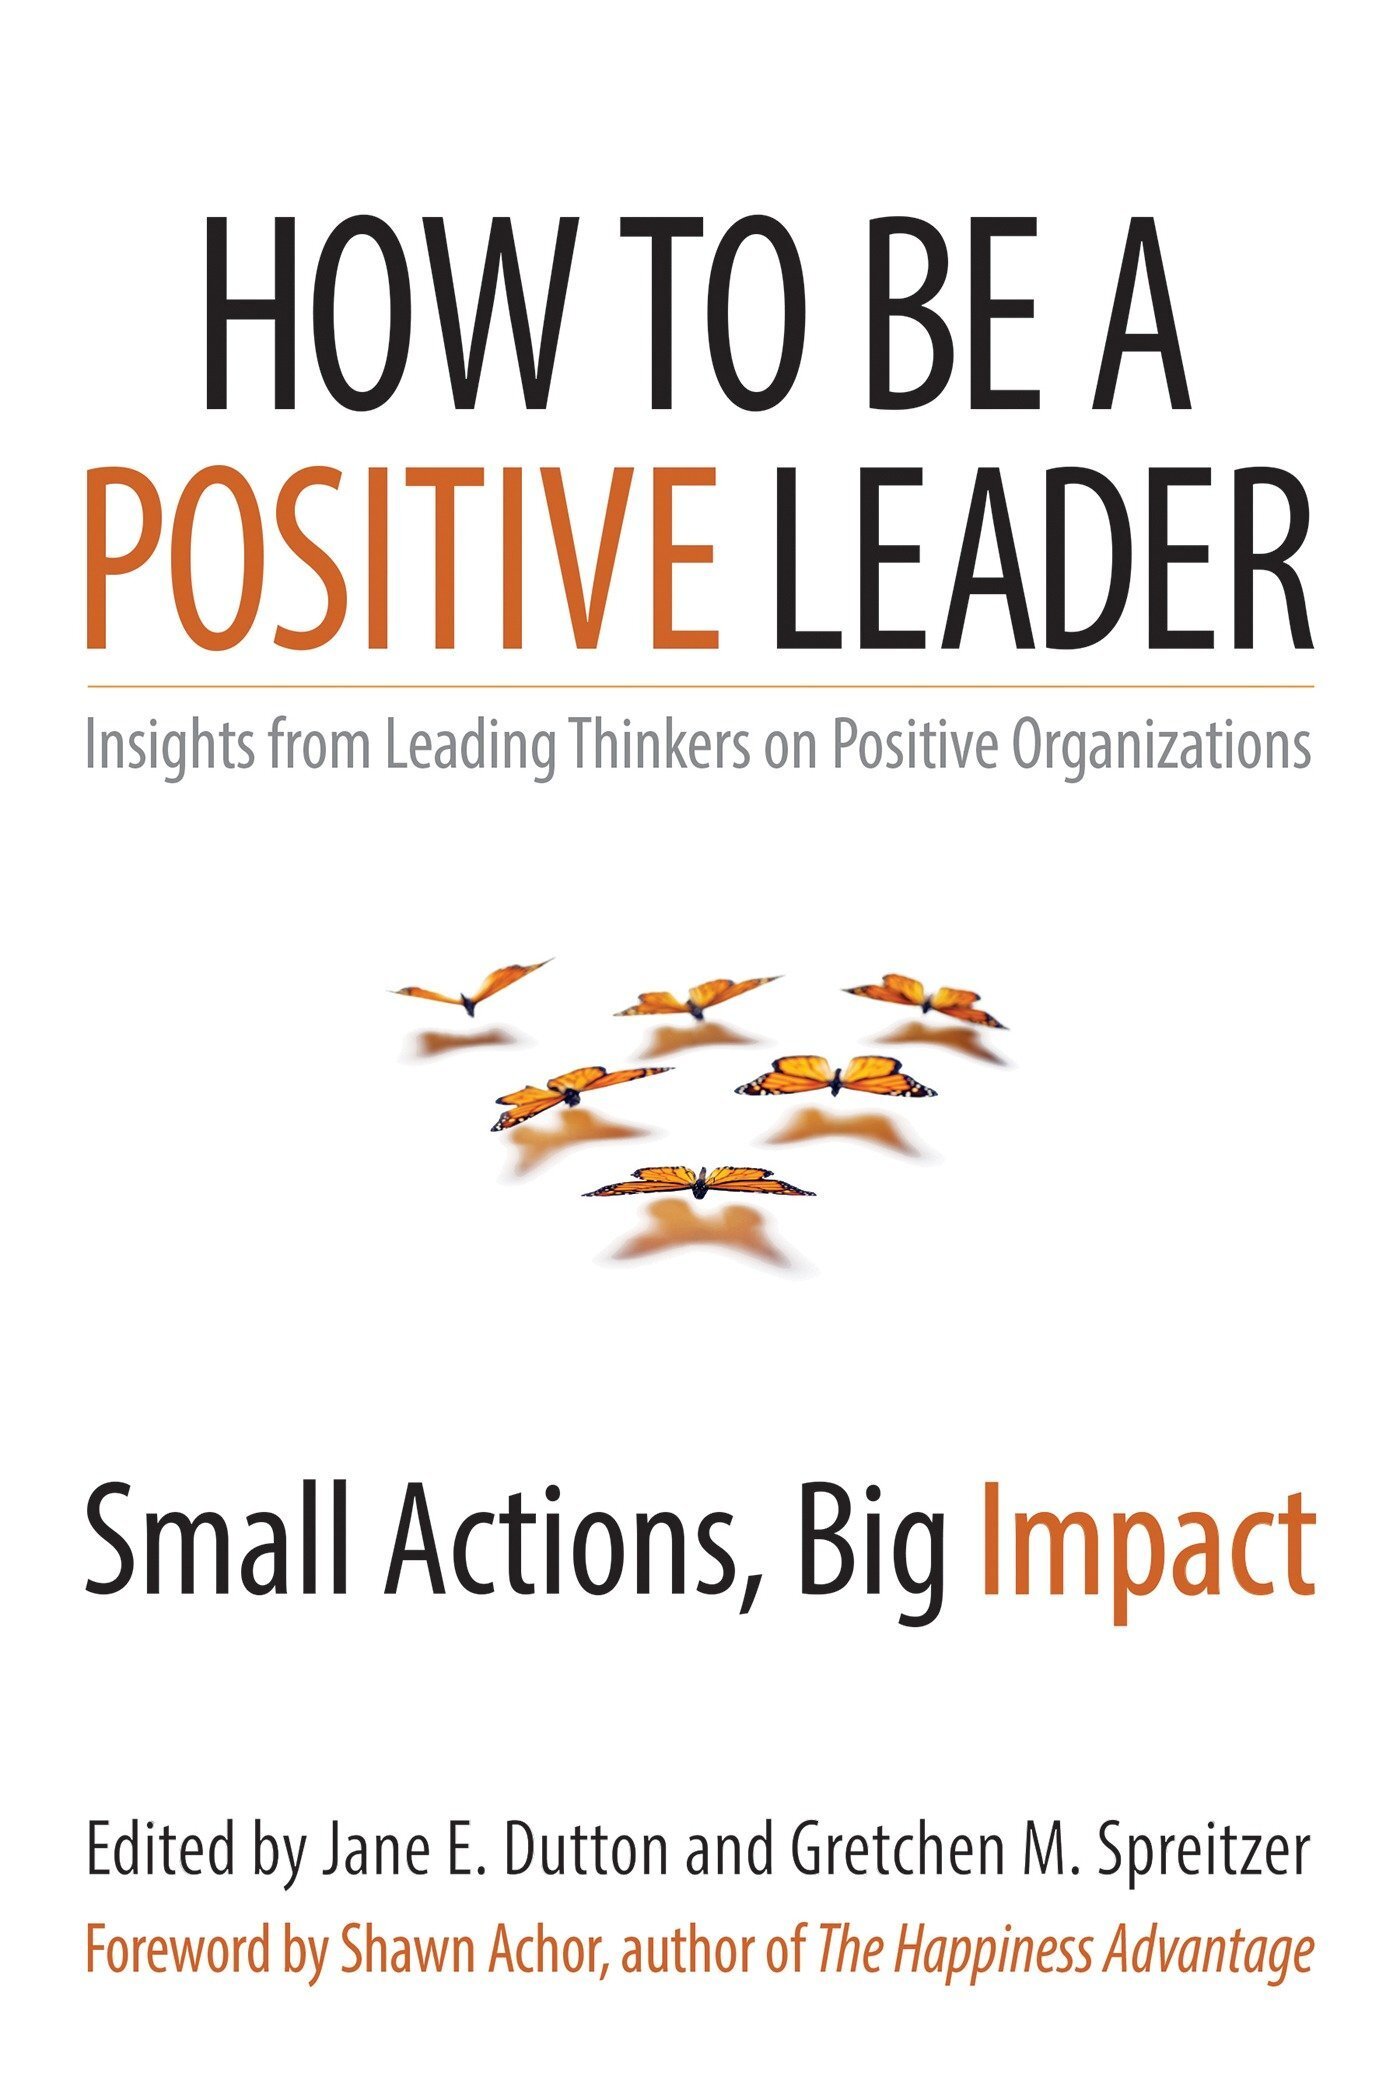 How To Be A Positive Leader: Small Actions, Big Impact - Jane Dutton, Gretchen Spreitzer